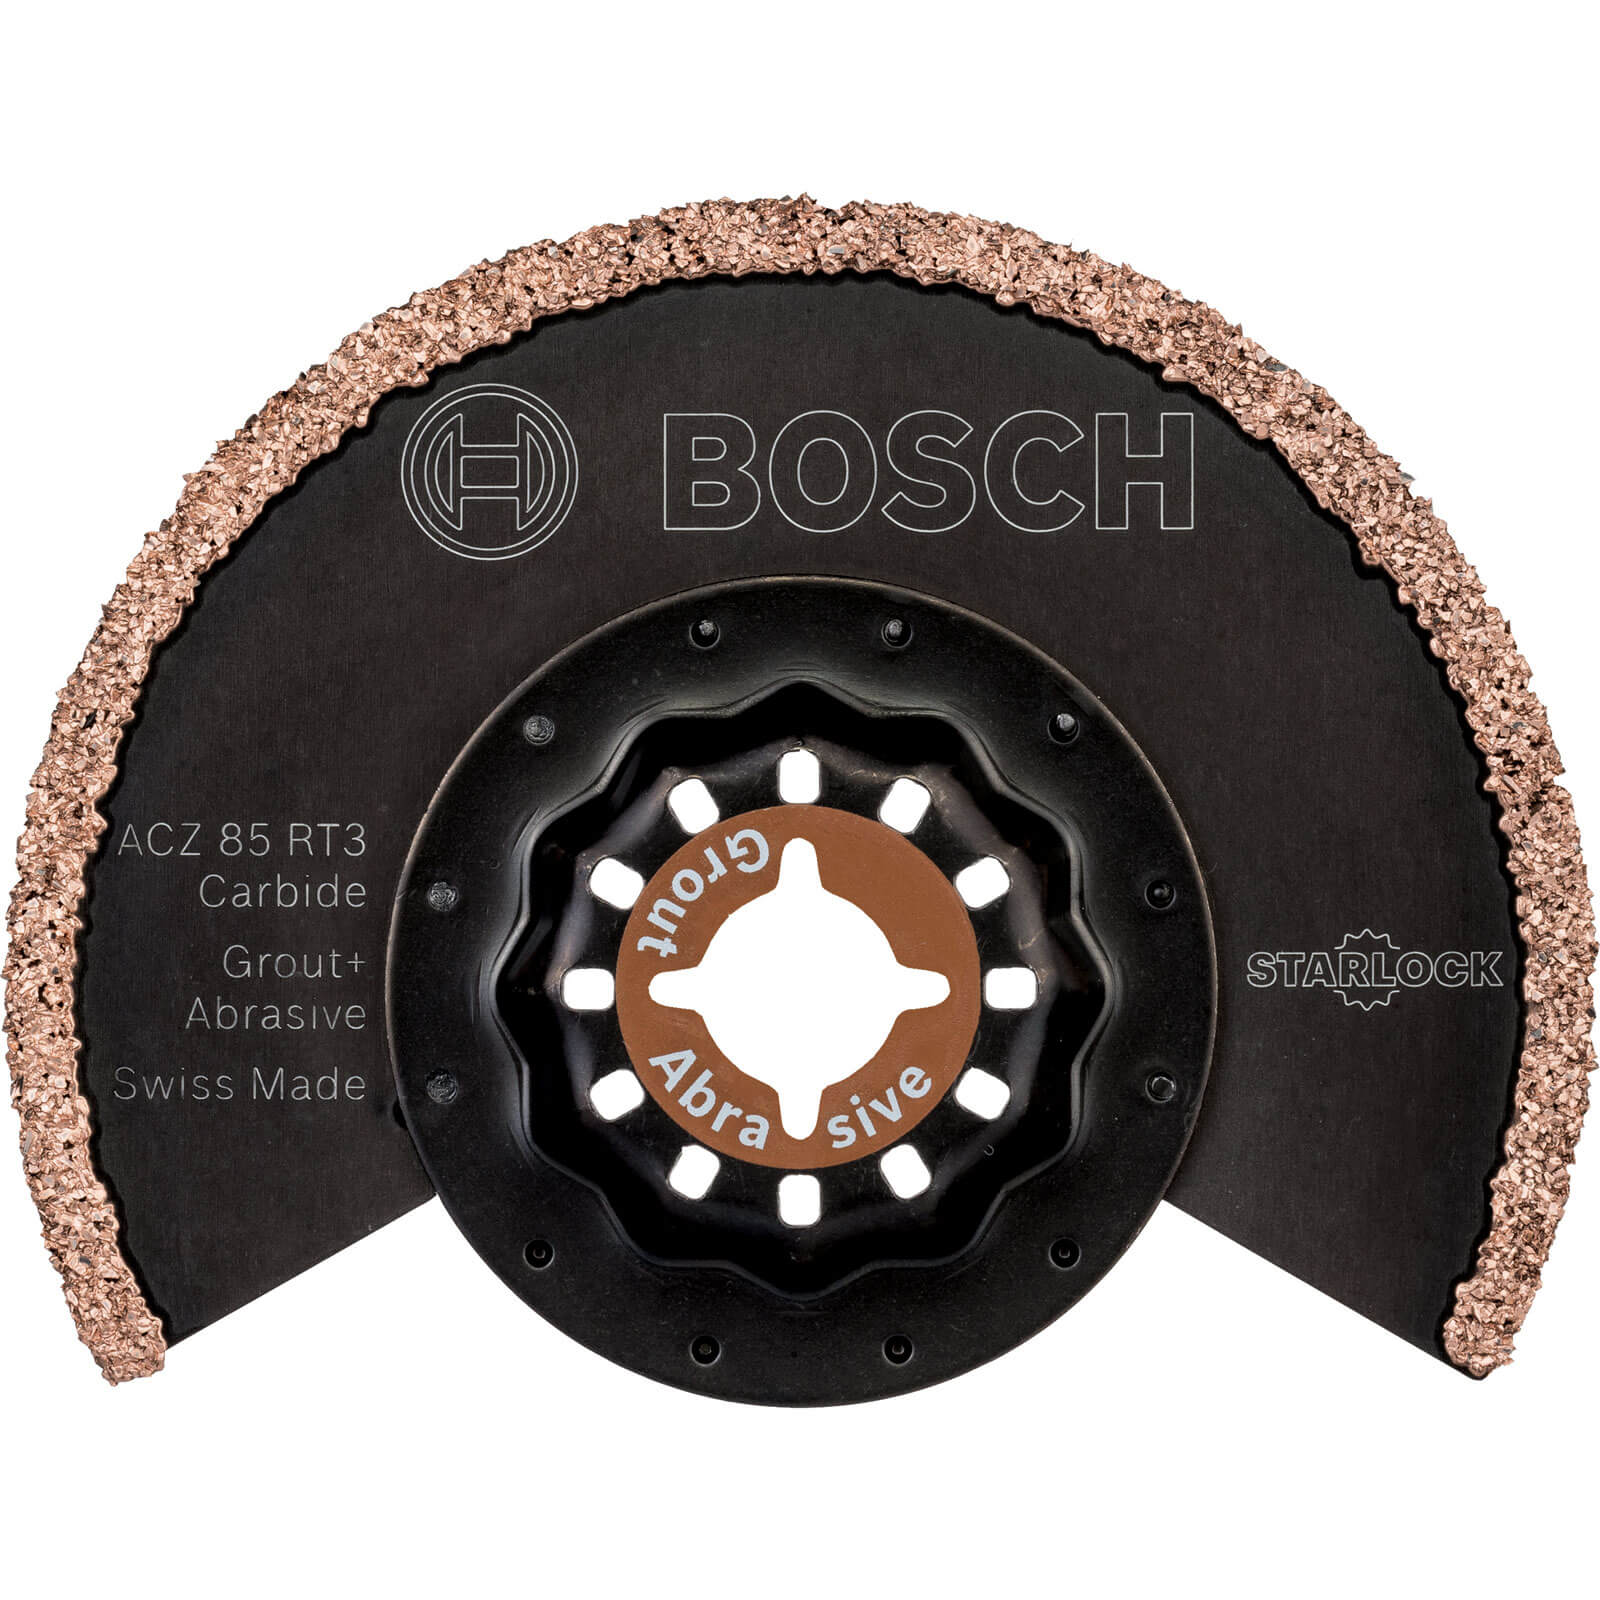 Photo of Bosch Acz 85 Rt3 Grout And Masonry Oscillating Multi Tool Segment Saw Blade 85mm Pack Of 1